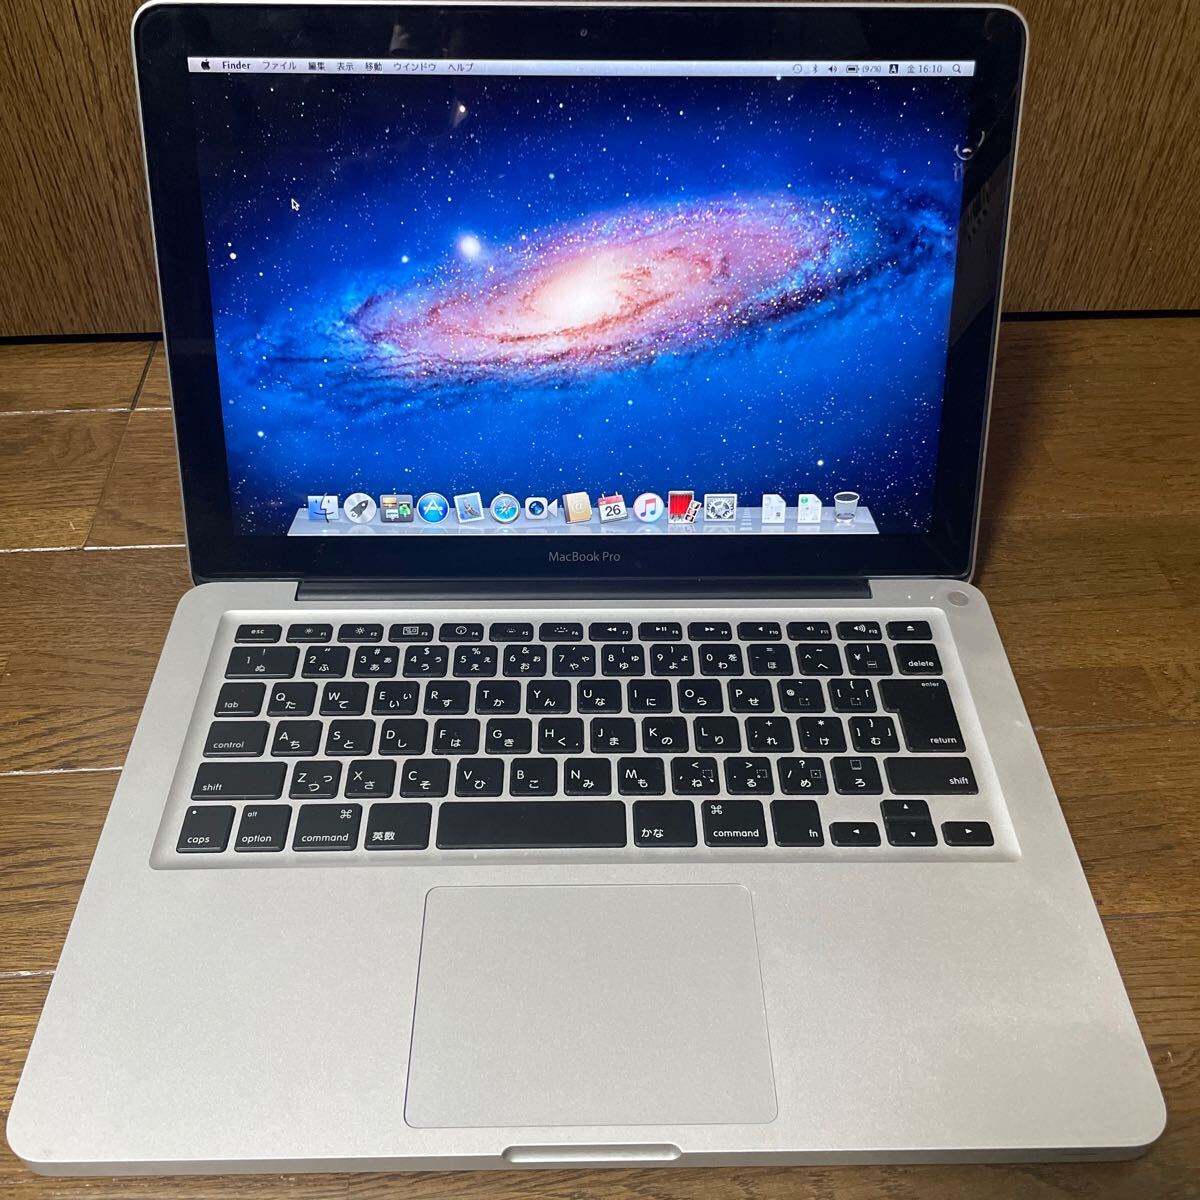 Apple MacBook Pro (13-inch 2009) Core2Duo 2.26GHz/128GB SSD/8GB/SuperDrive/OS X Lion ジャンクの画像2